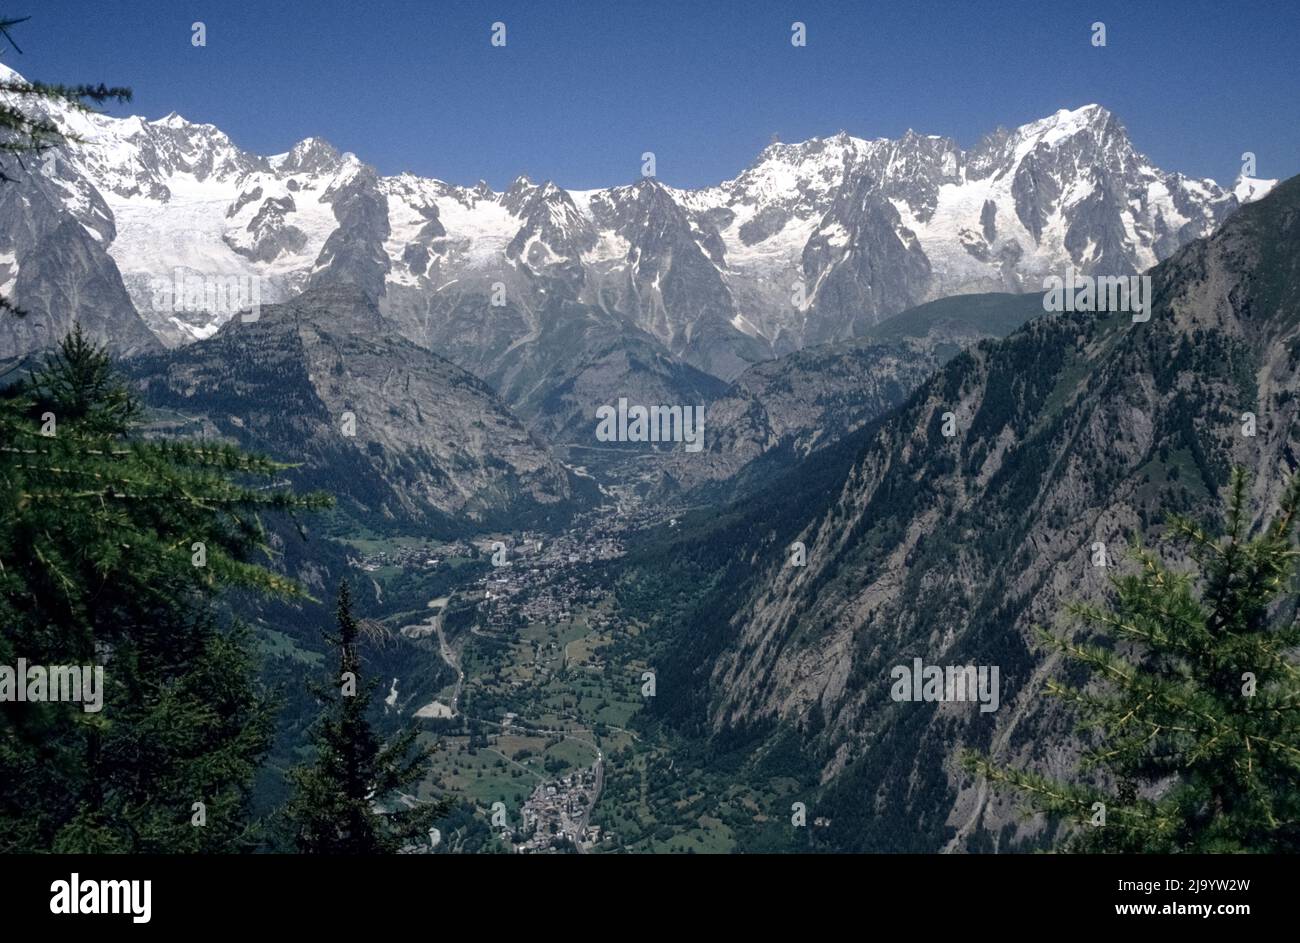 Panorama at the Belvedere d'Arpy. South side of the Mont Blanc massif and Courmayeur from the viewpoint. Aosta Valley, Italy, 1990 Stock Photo